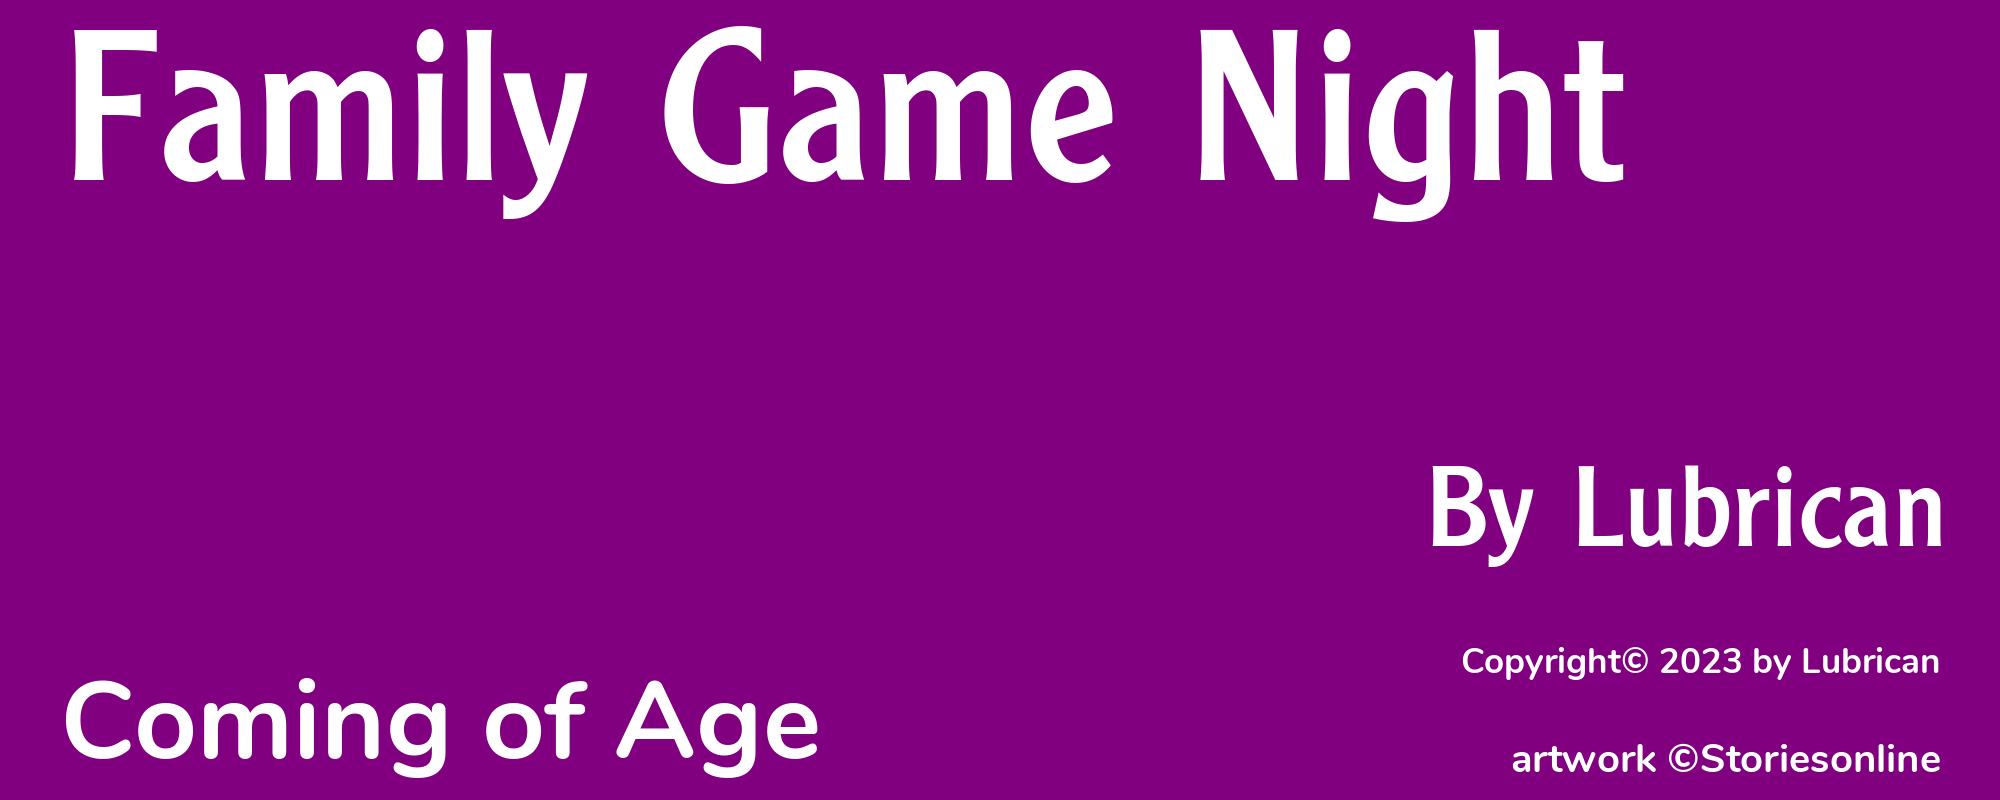 Family Game Night - Cover